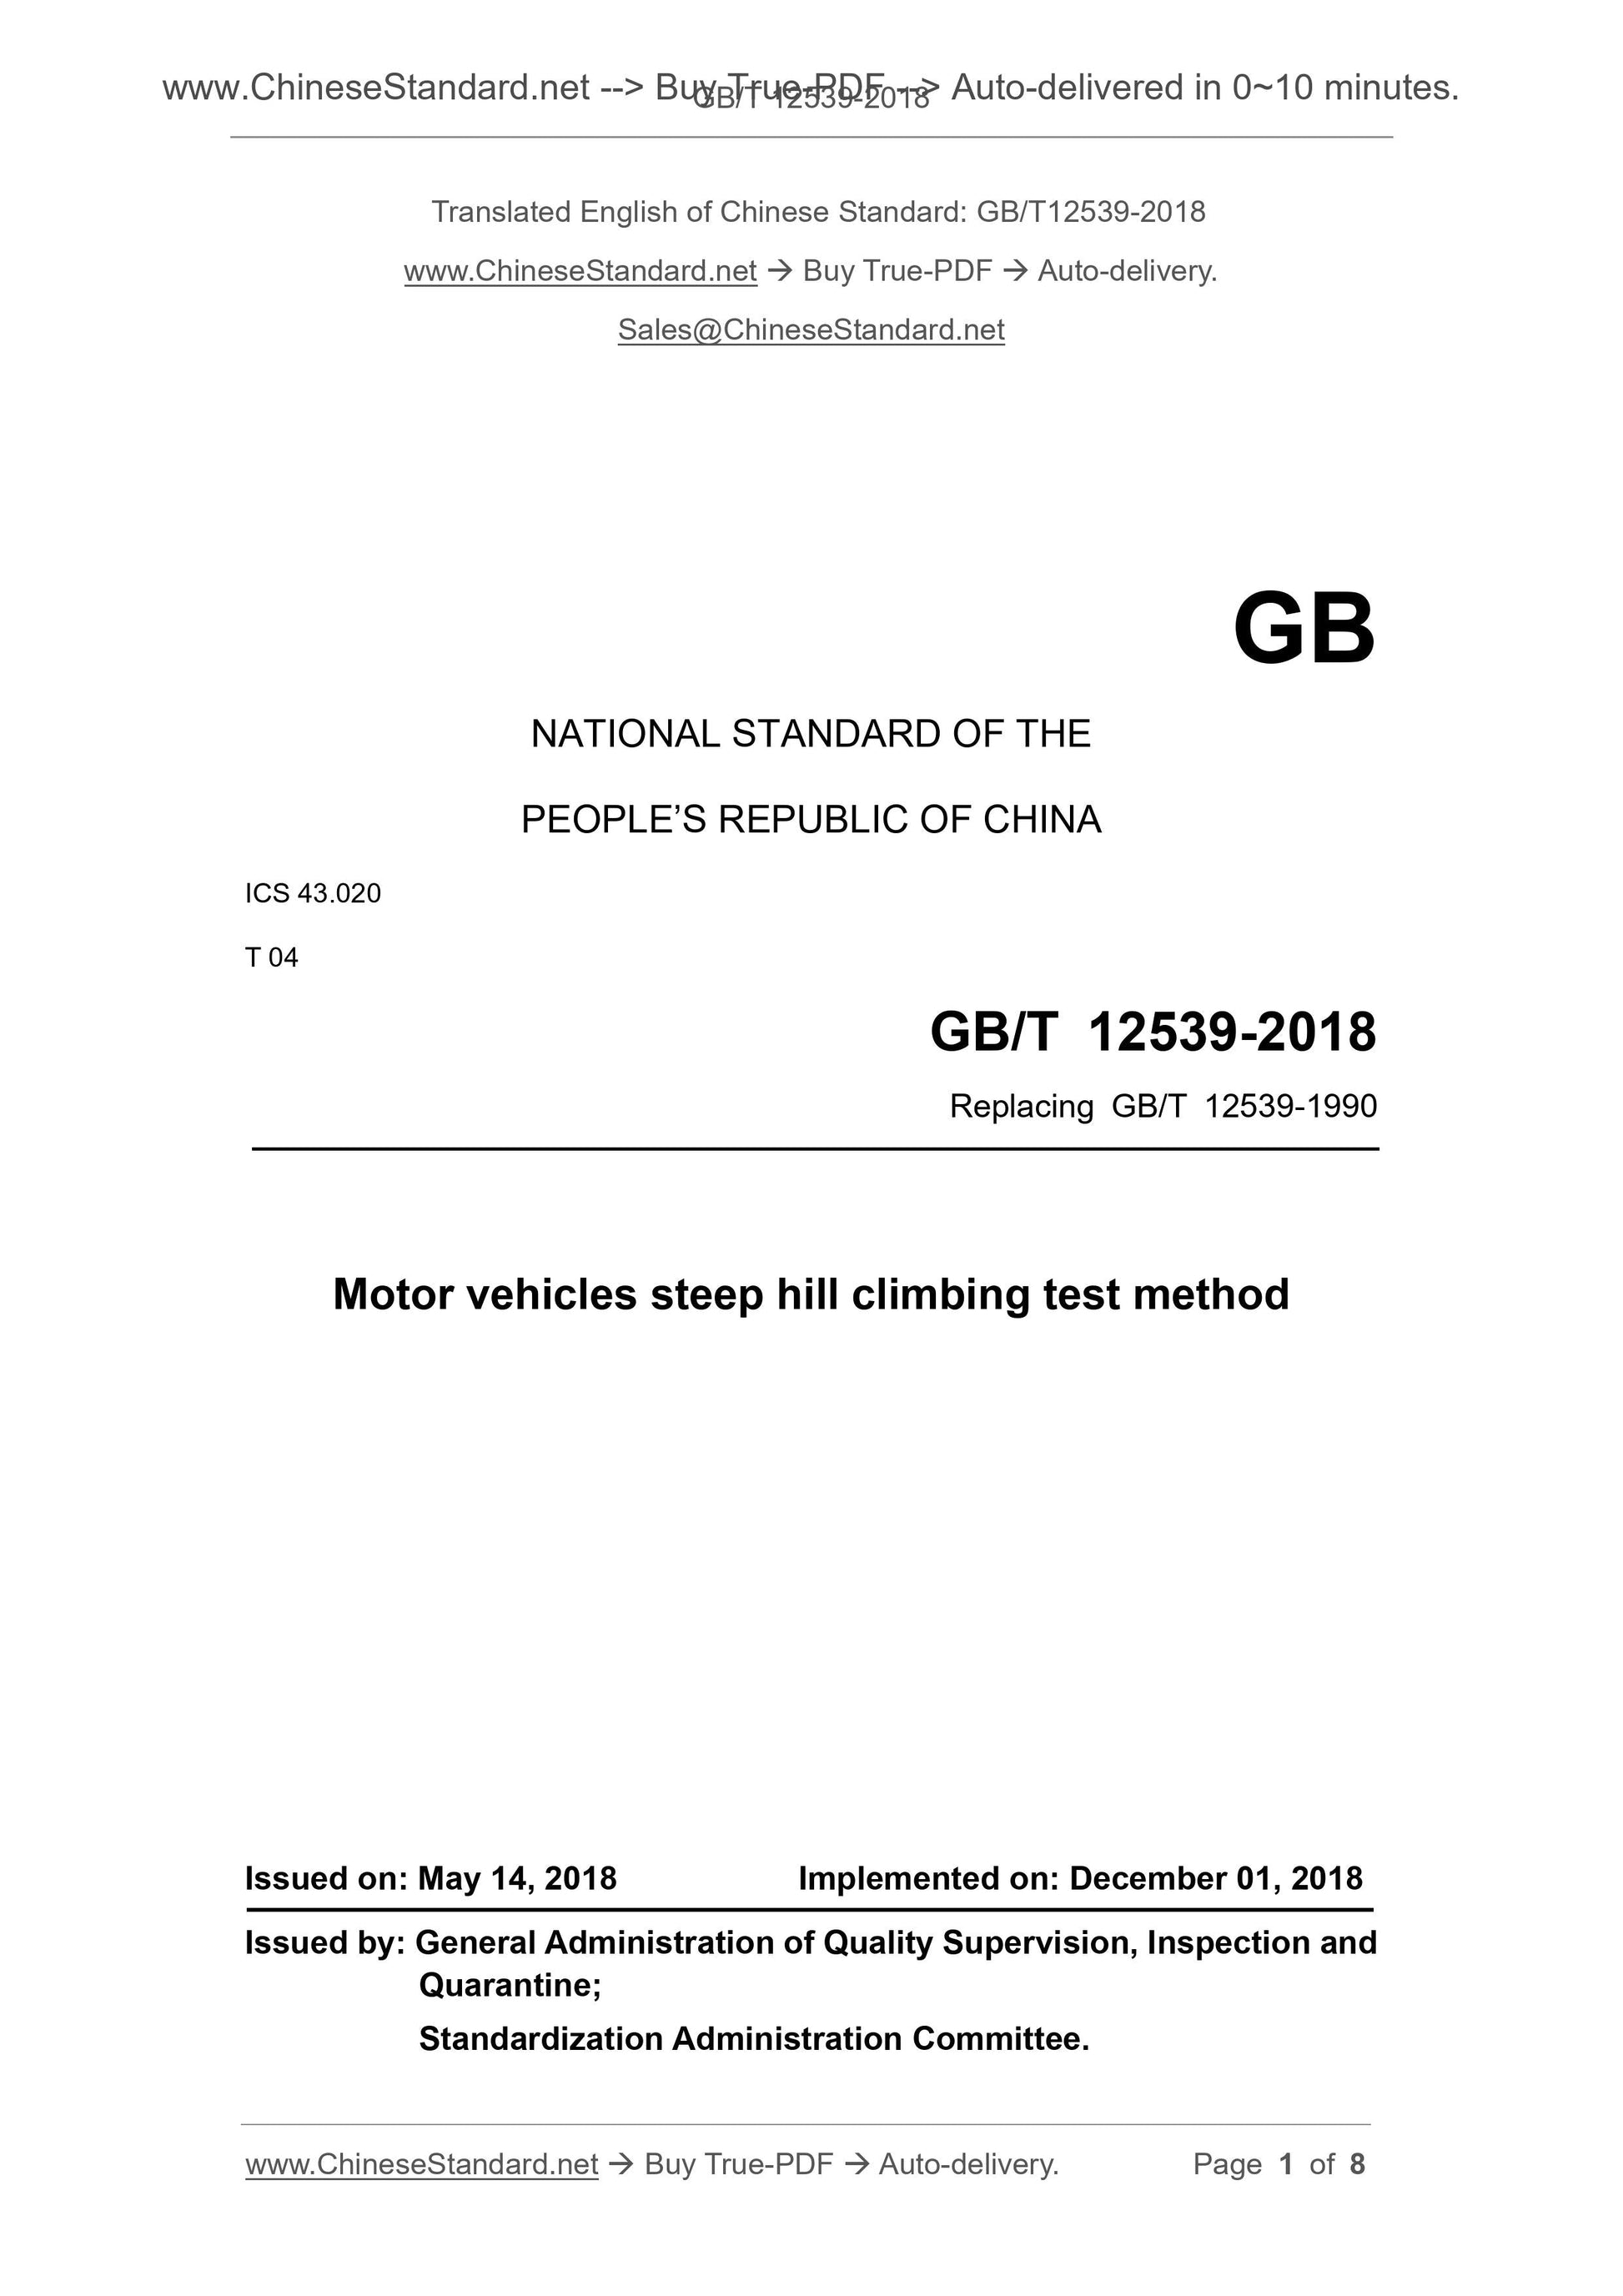 GB/T 12539-2018 Page 1